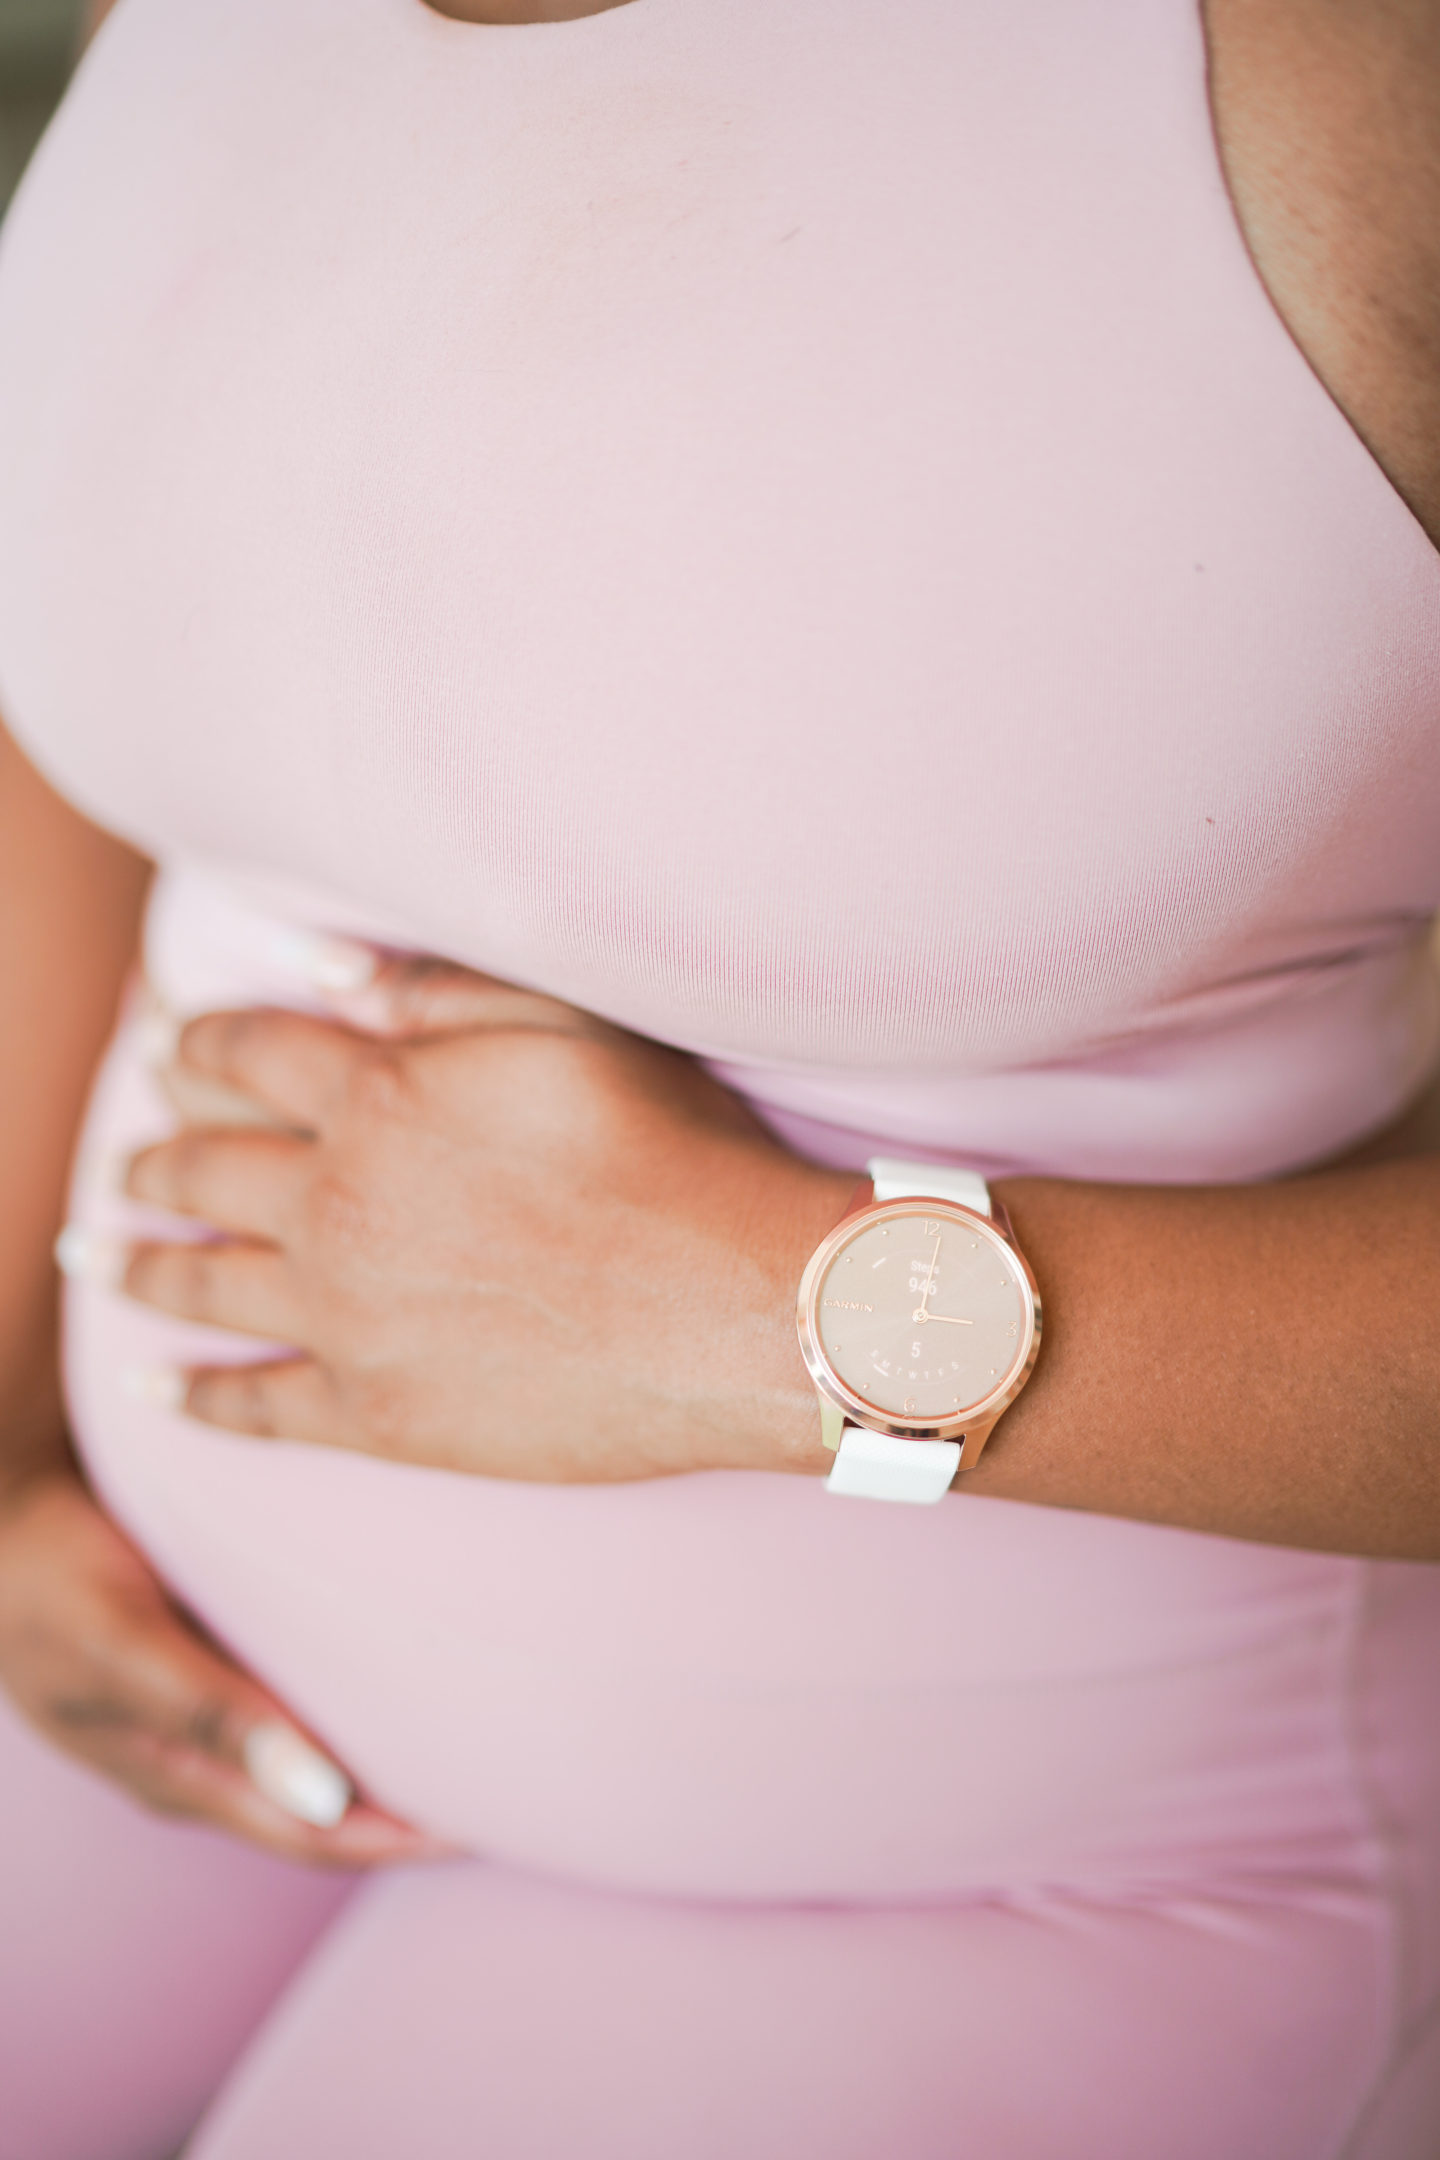 How to get active in your 3rd Trimester of Pregnancy